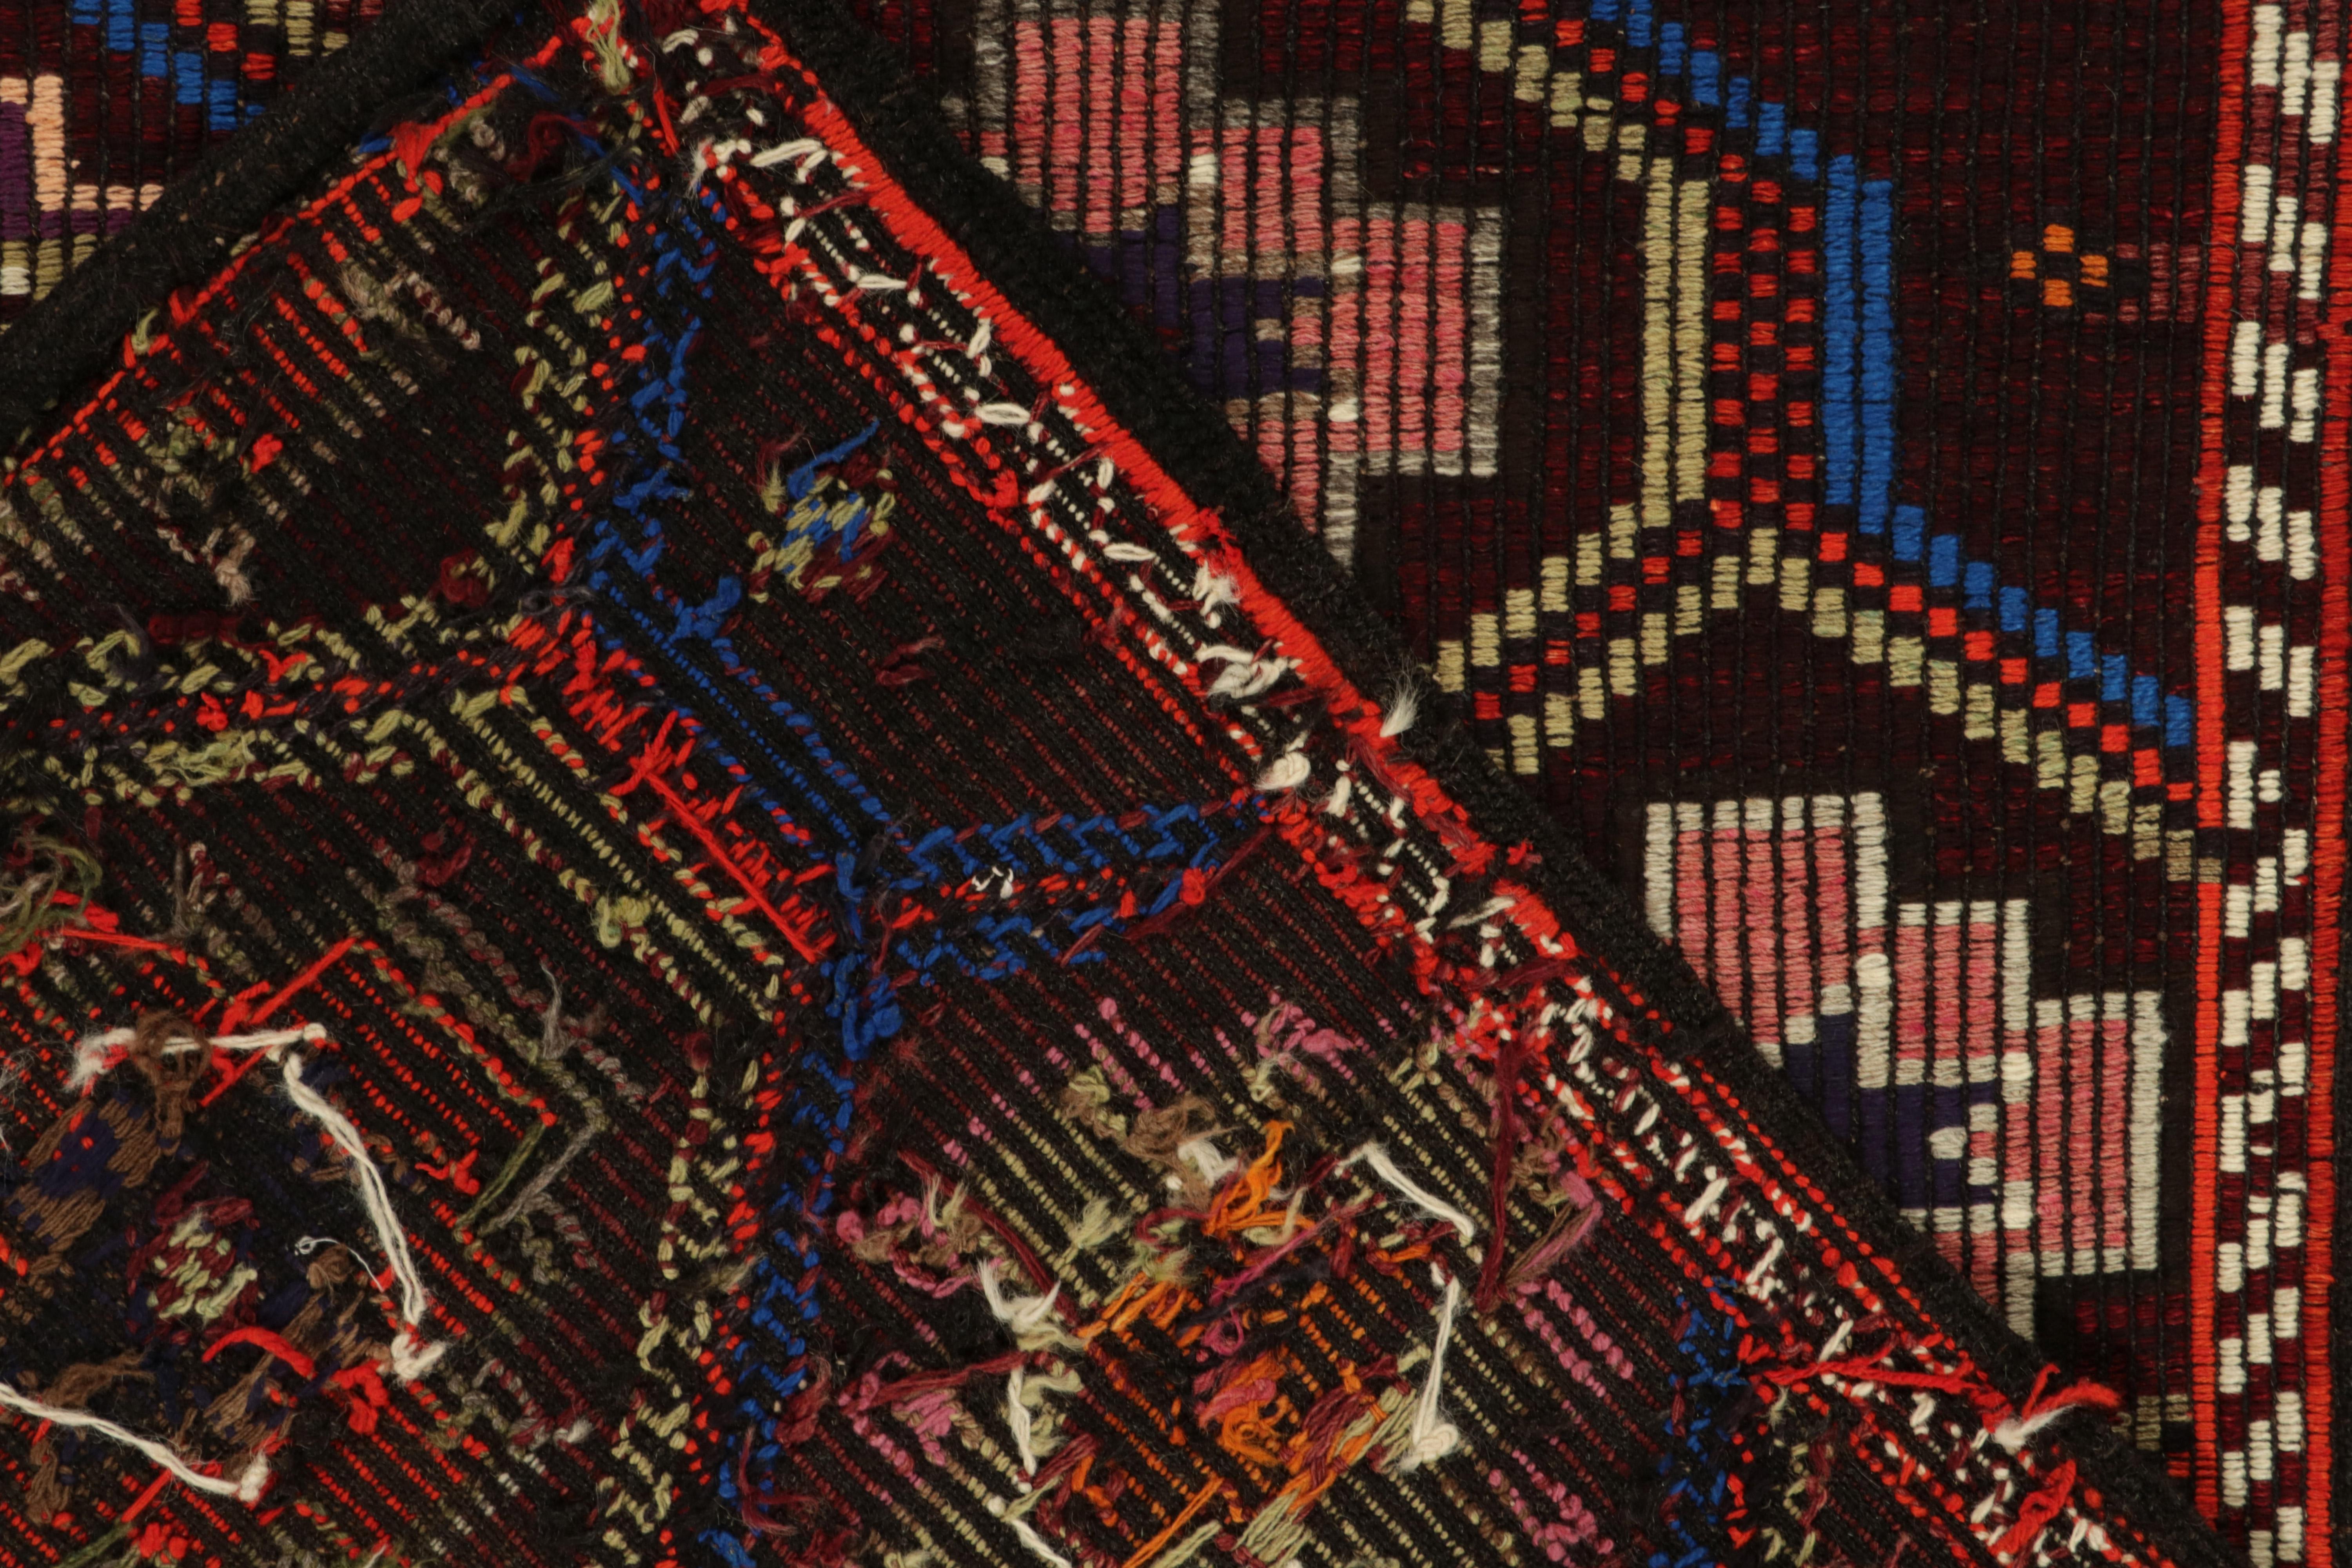 Vintage Kilim Rug in Red, Multicolor Tribal Geometric Patterns by Rug & Kilim In Good Condition For Sale In Long Island City, NY